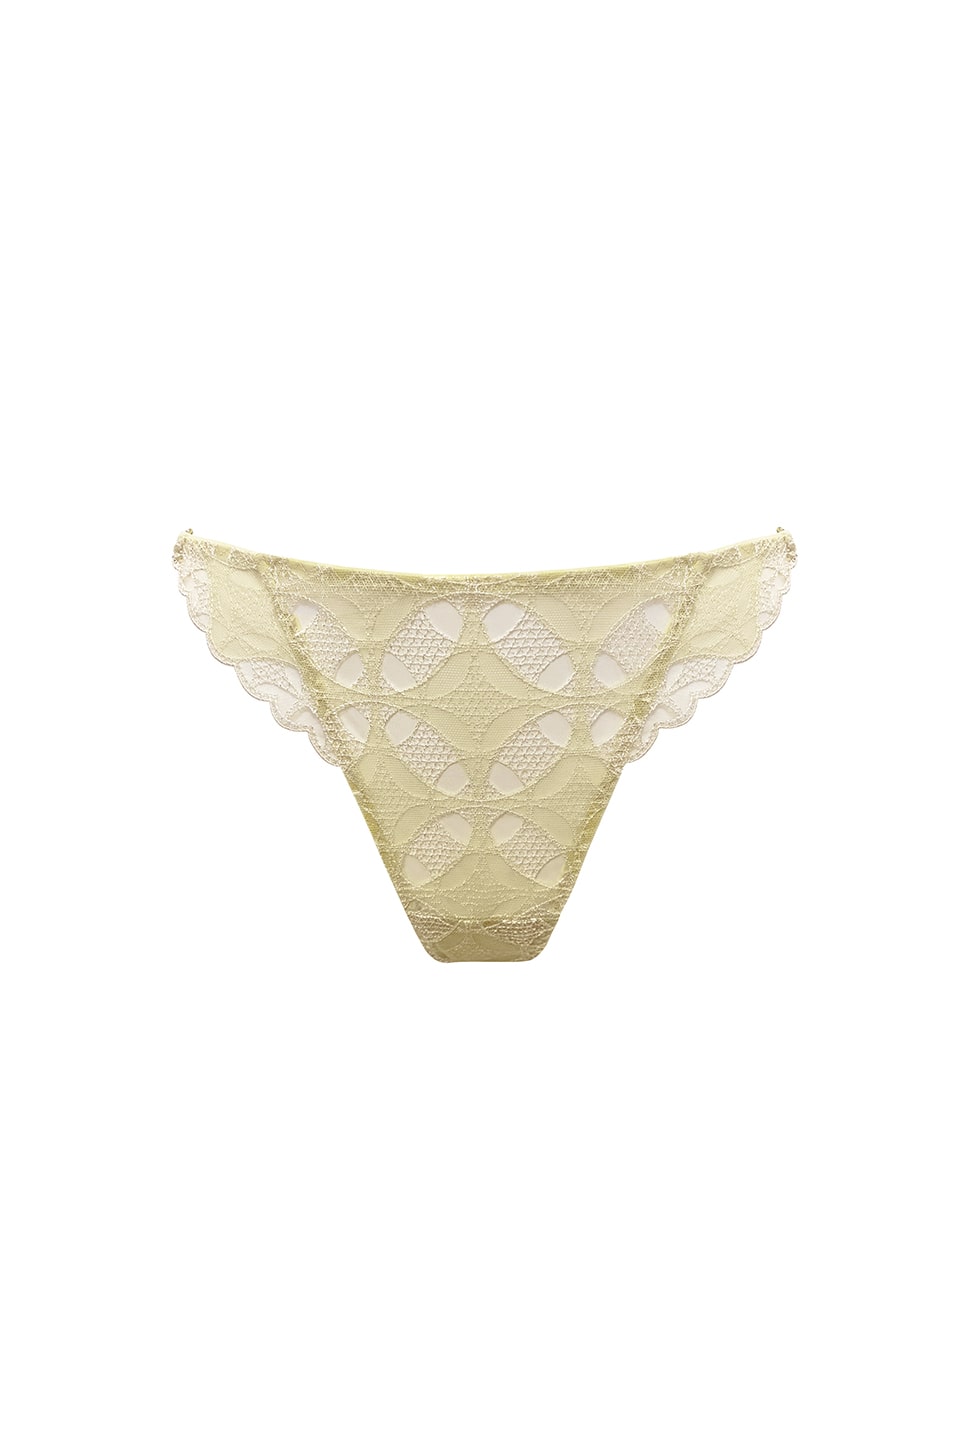 Shop online trendy Yellow Undergarments from Bordelle Fashion designer. Product gallery 1